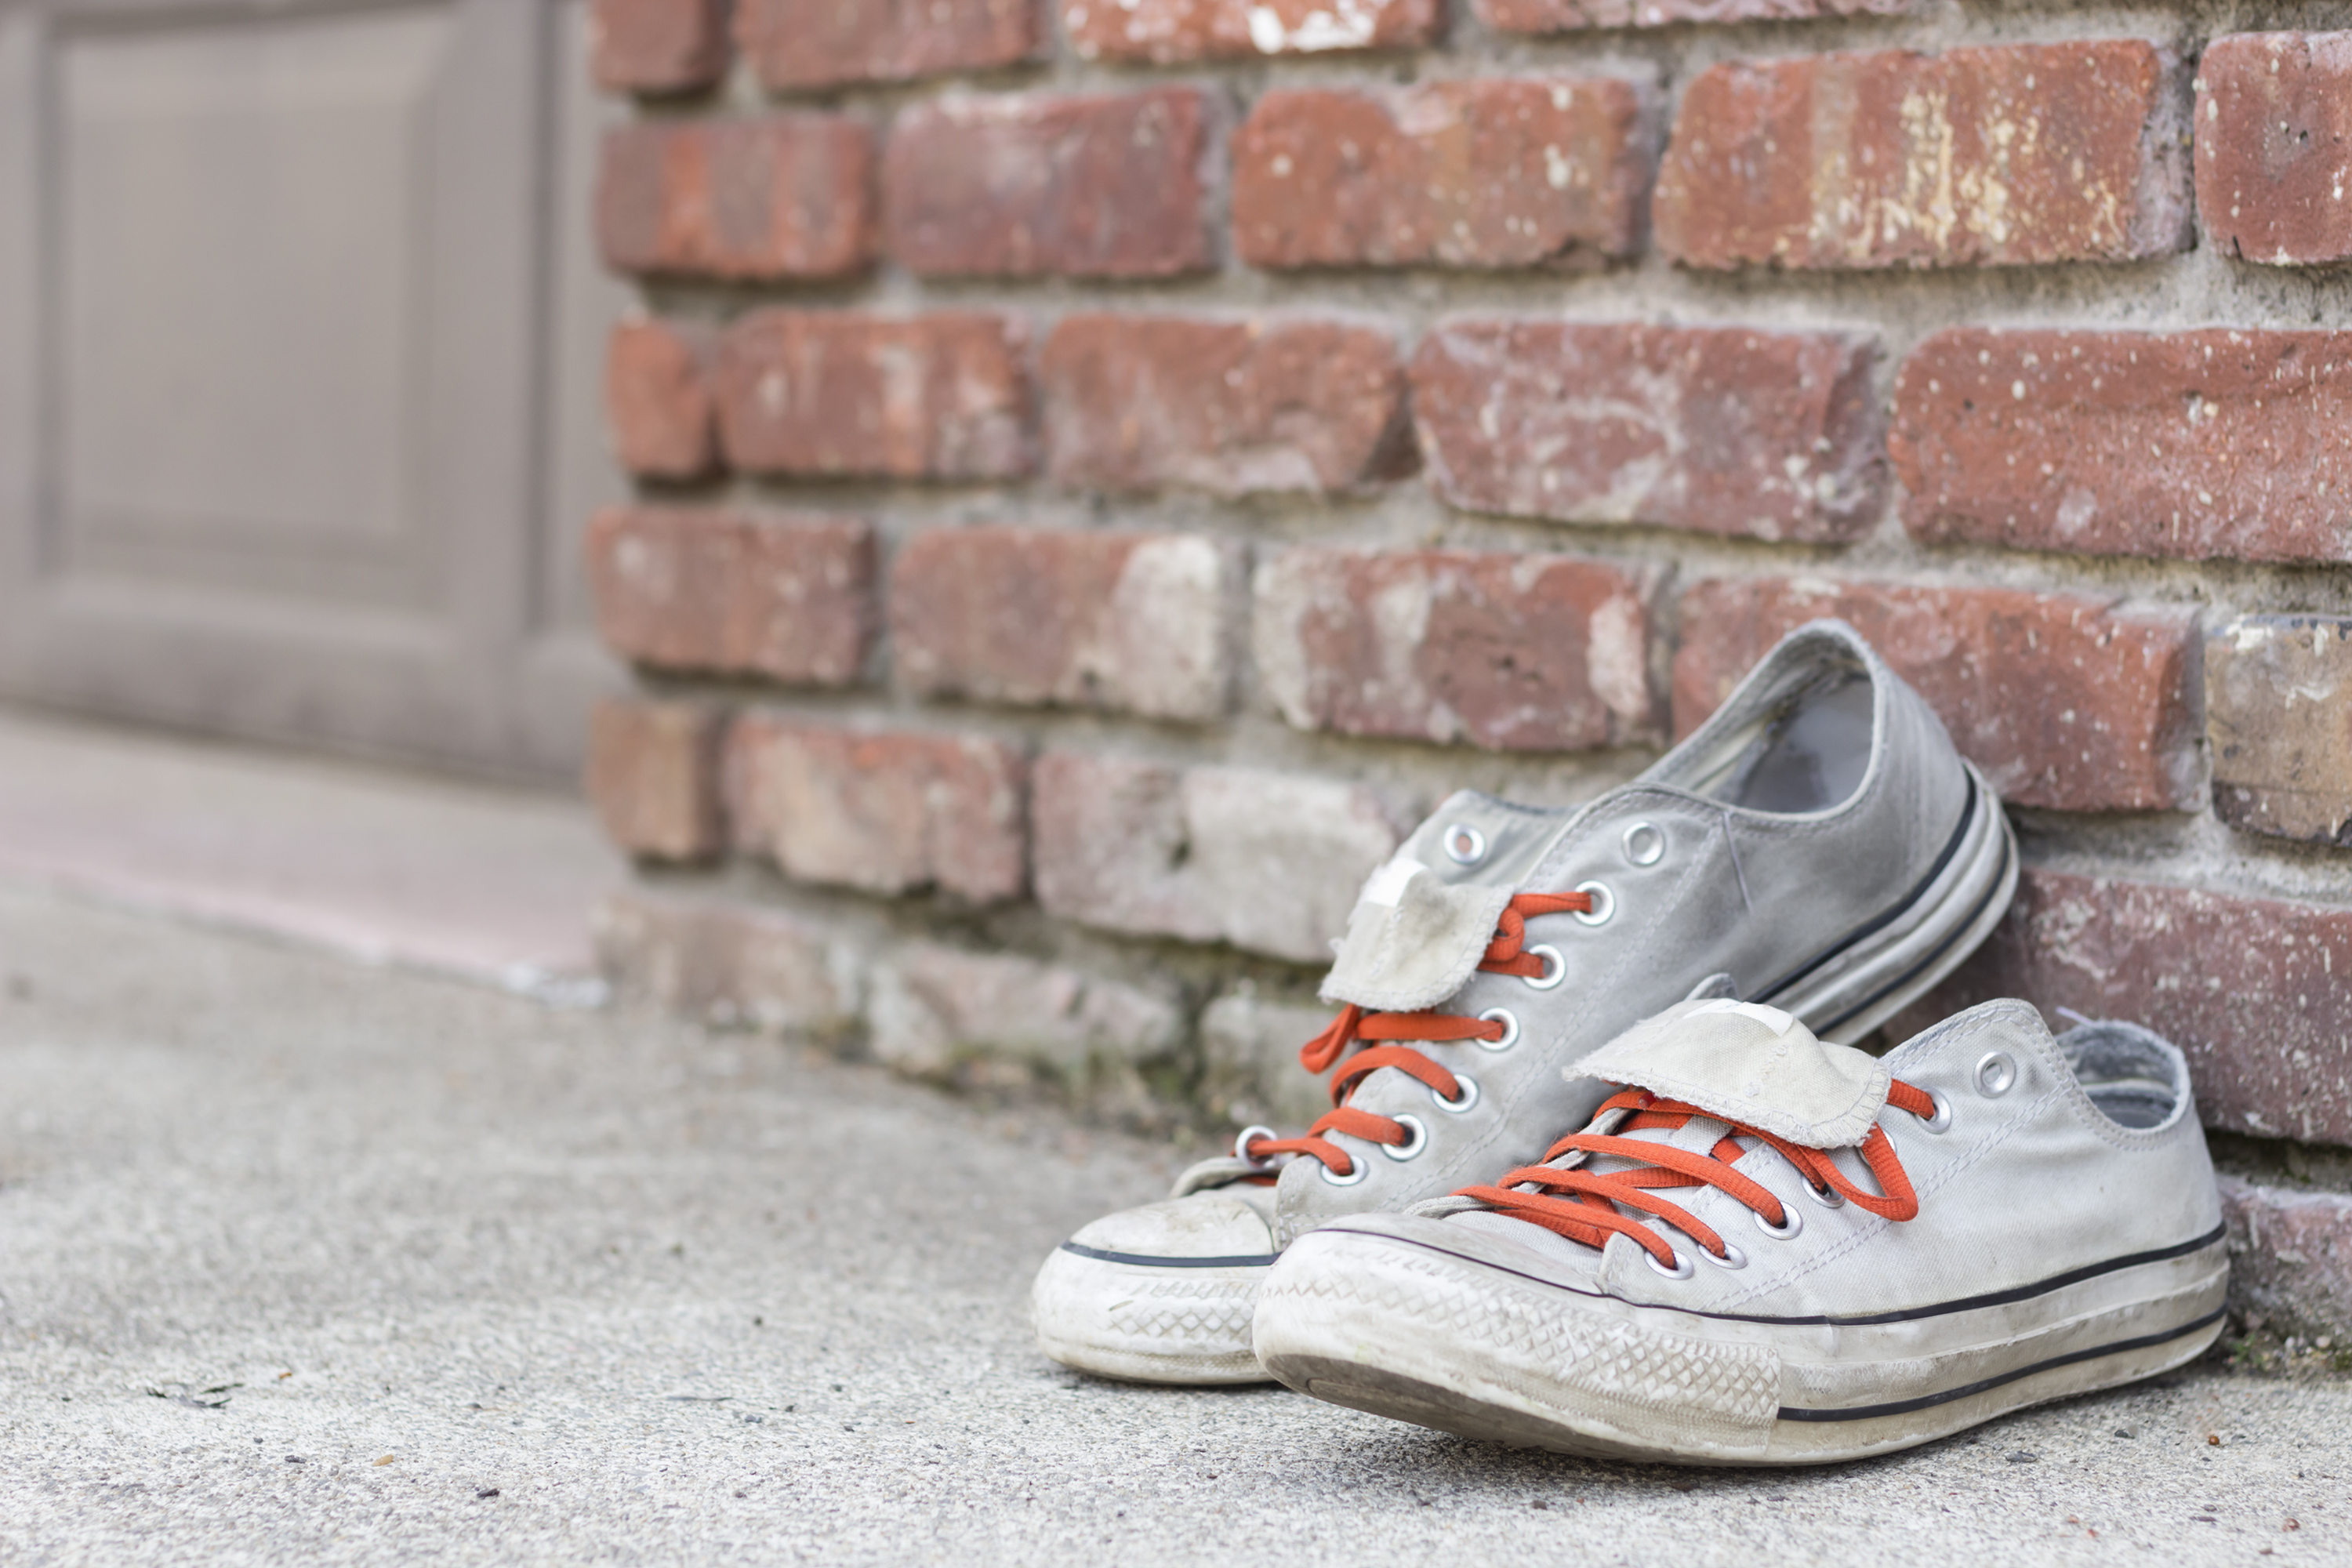 Pair of old worn classic sneakers leaning against a brick wall